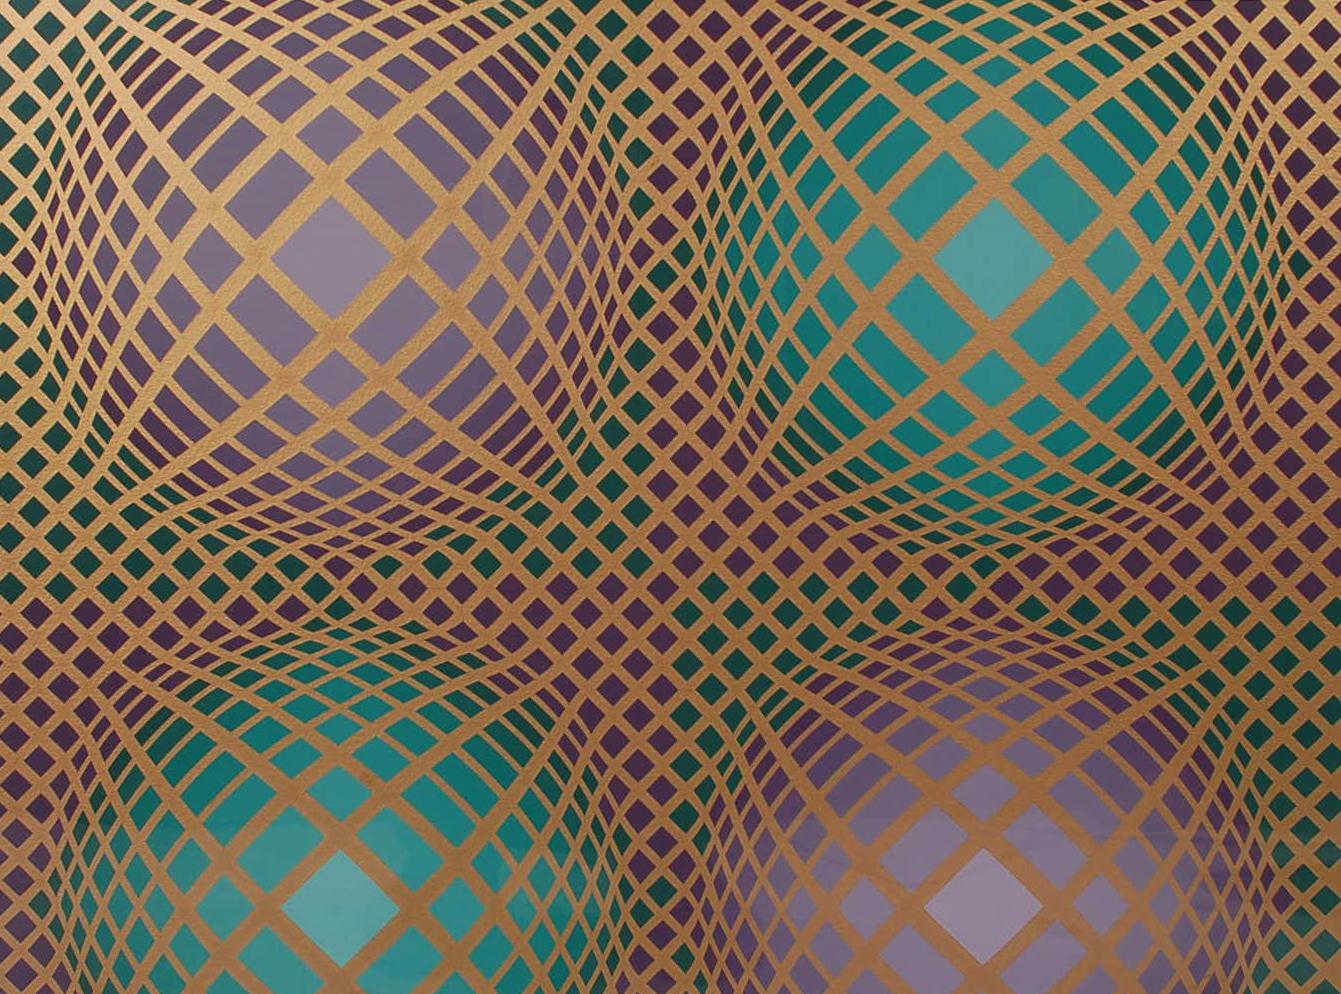 A beautiful limited edition print by Victor Vasarely. Vibrant rich colors. Comes framed and matted as shown. Signed and numbered 169/250. Comes with COA.